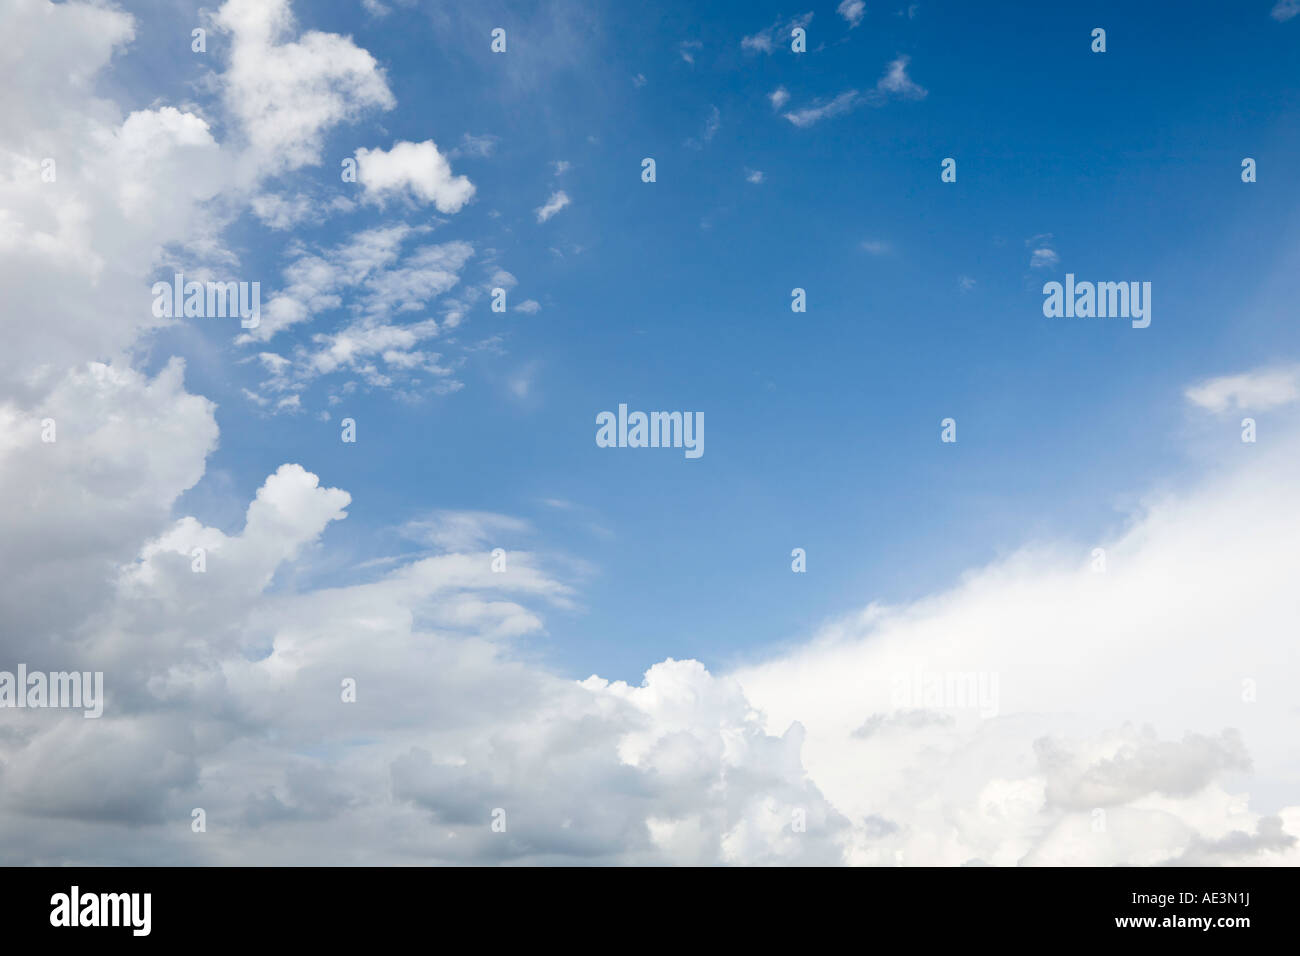 White cloud formations in a blue sky Stock Photo